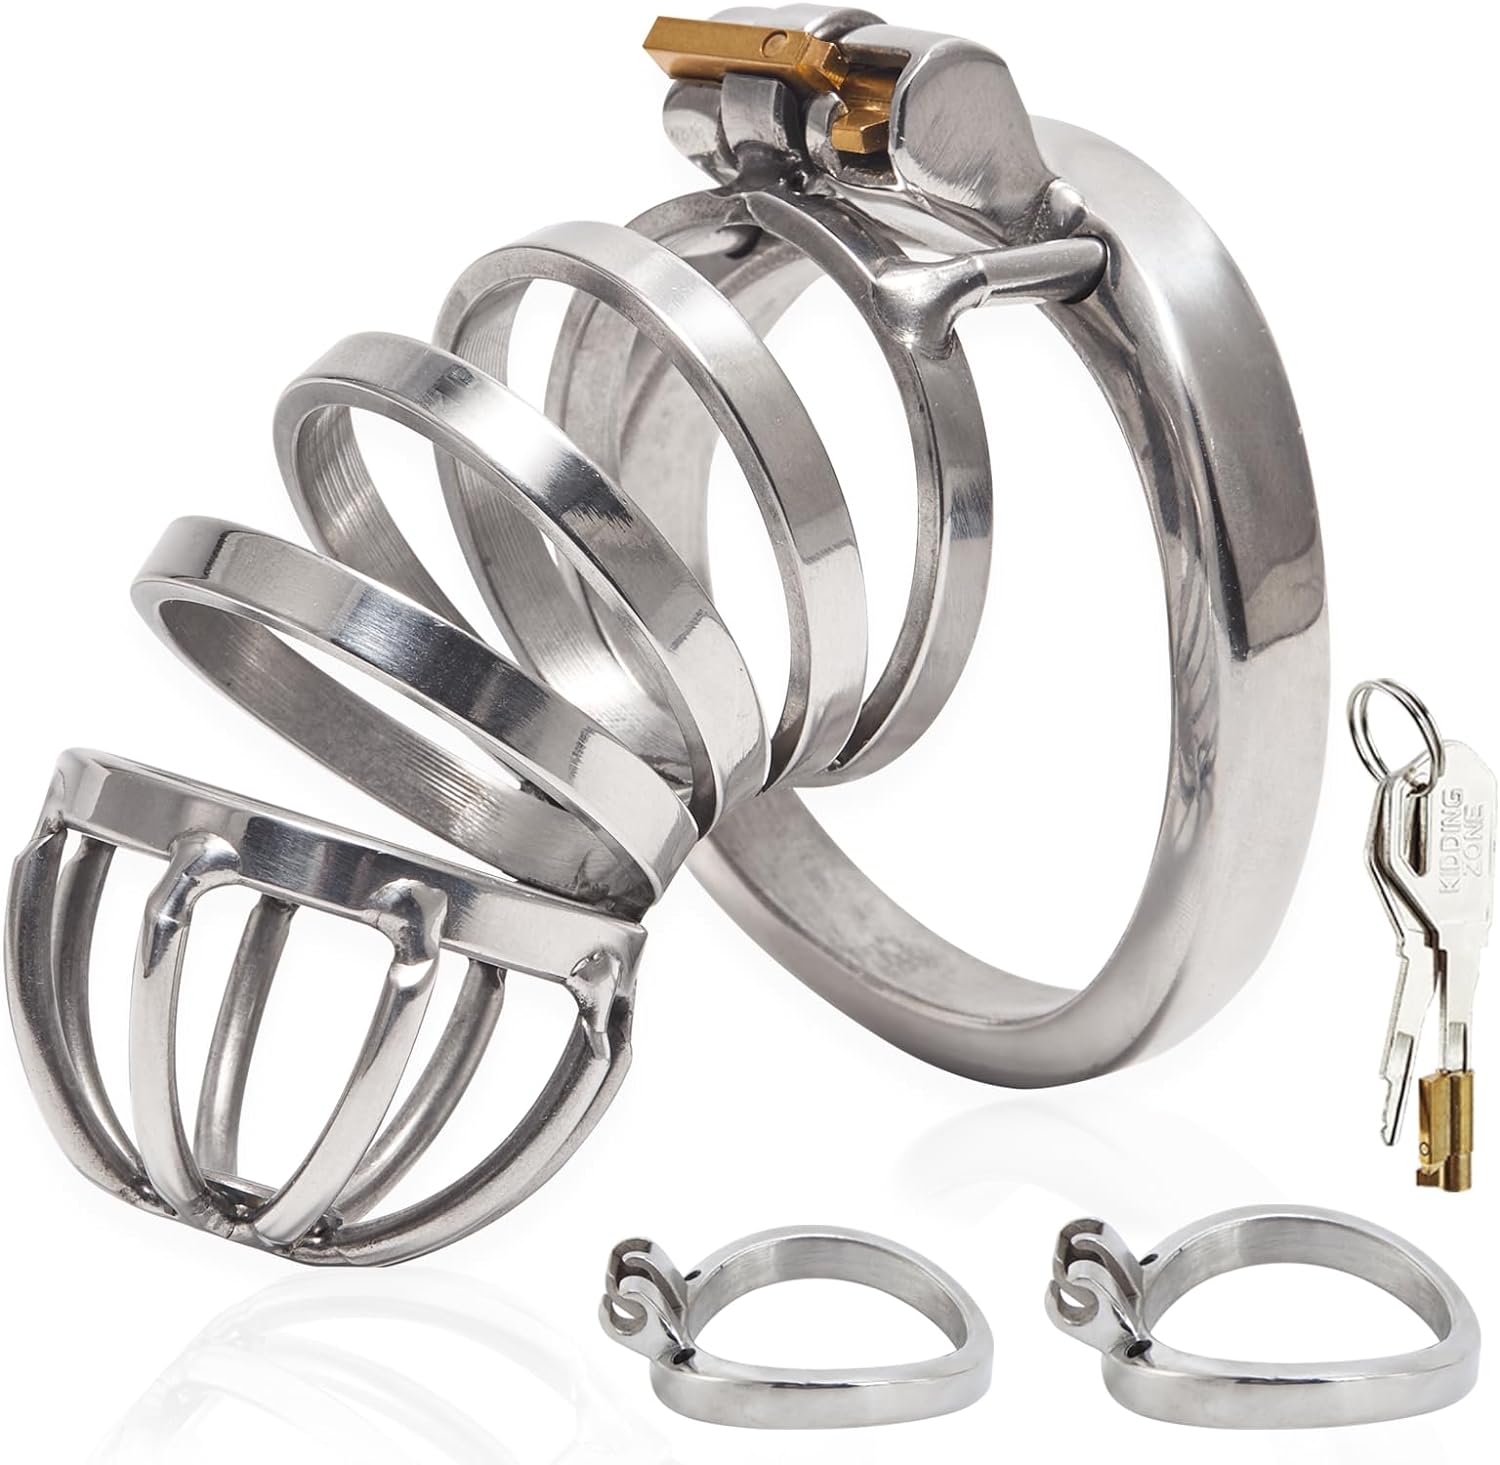 Metal Penis Annulus Cage Padlock - Davidsource Chrome Plated Stainless  Steel Chastity Device Cock Cage for Men Fits Most of Size Adult Male Sex  Toy